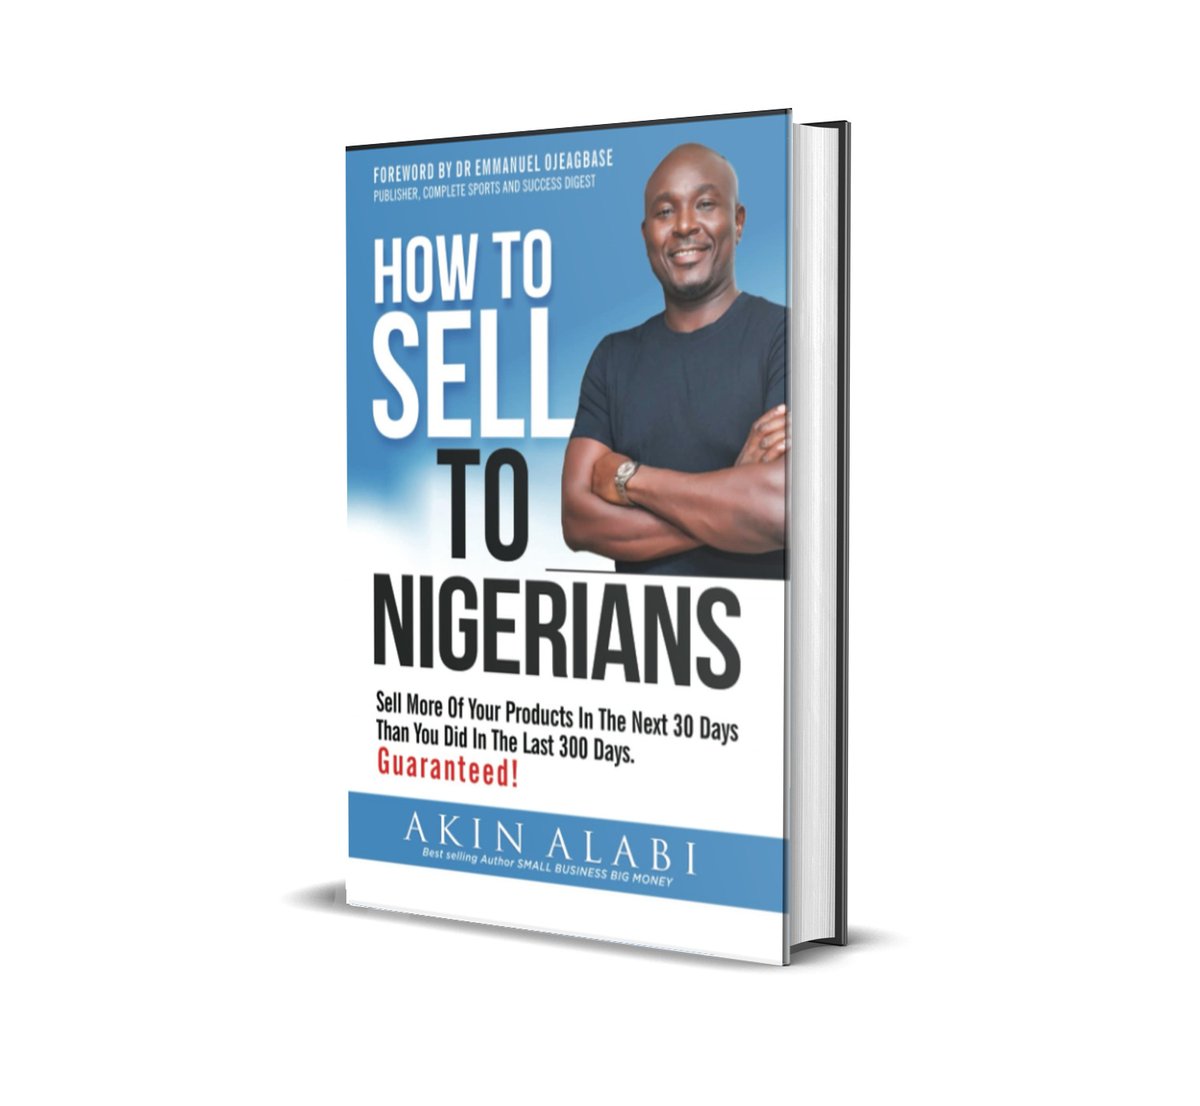 How to sell to Nigerians...this book has made many millionaires in Nigeria. If you don't have this book yet, make an effort to get it, especially Marketers. Massive Values inside. 

#MarketingStrategy #business #selling #nigeriavsghana #KudaForAfrica #AtikuDeclaration